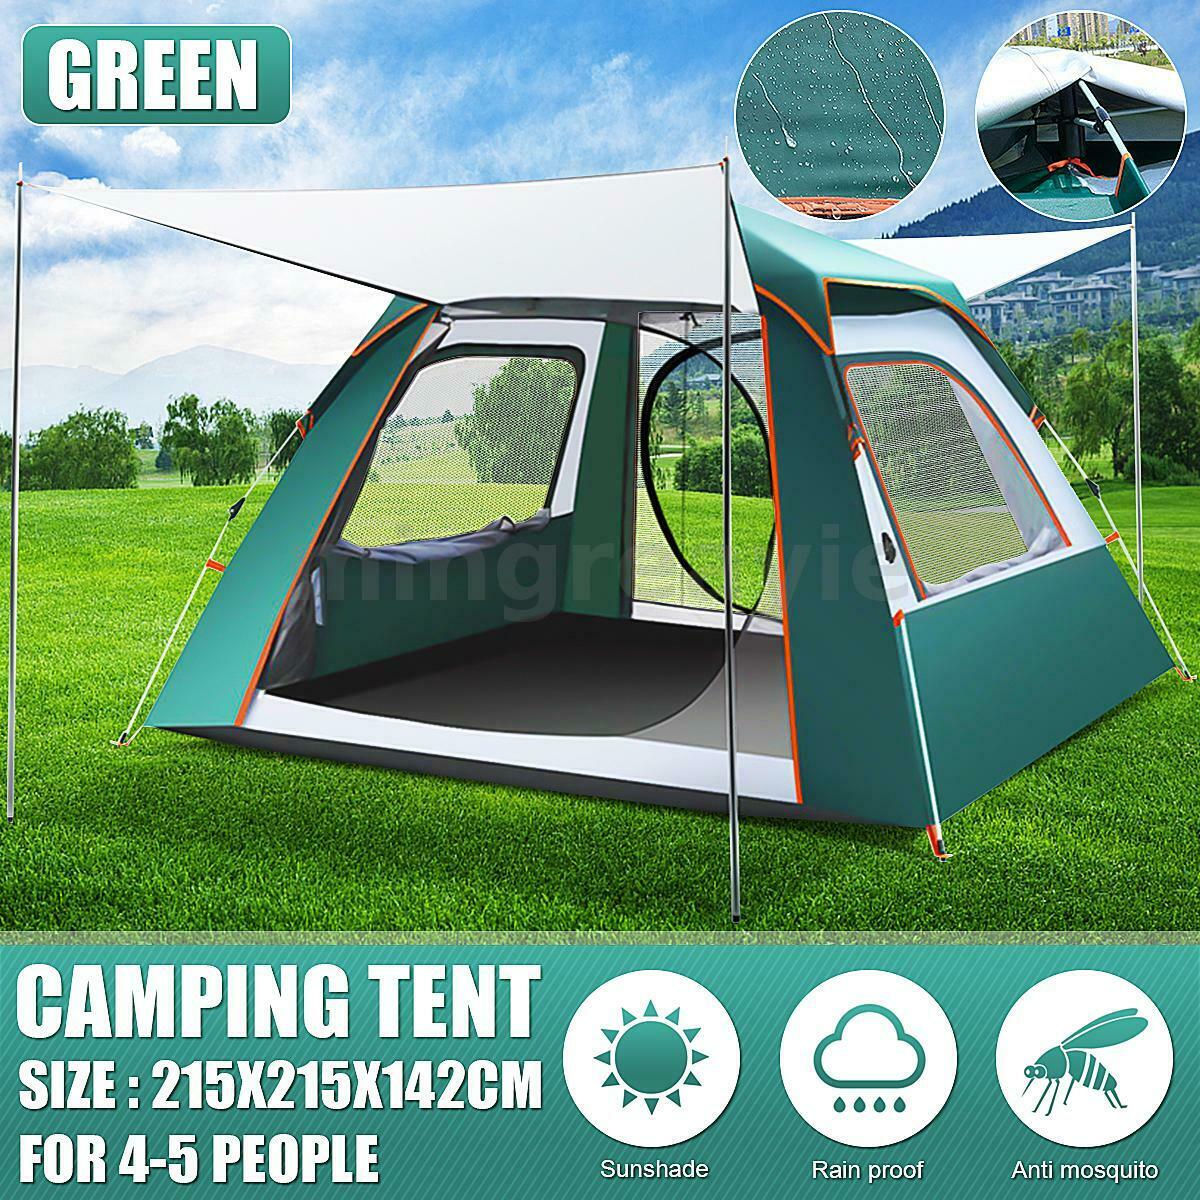 4-5 People Camping Tent Automatic Instant Pop Up Hiking Tent Waterproof Outdoor